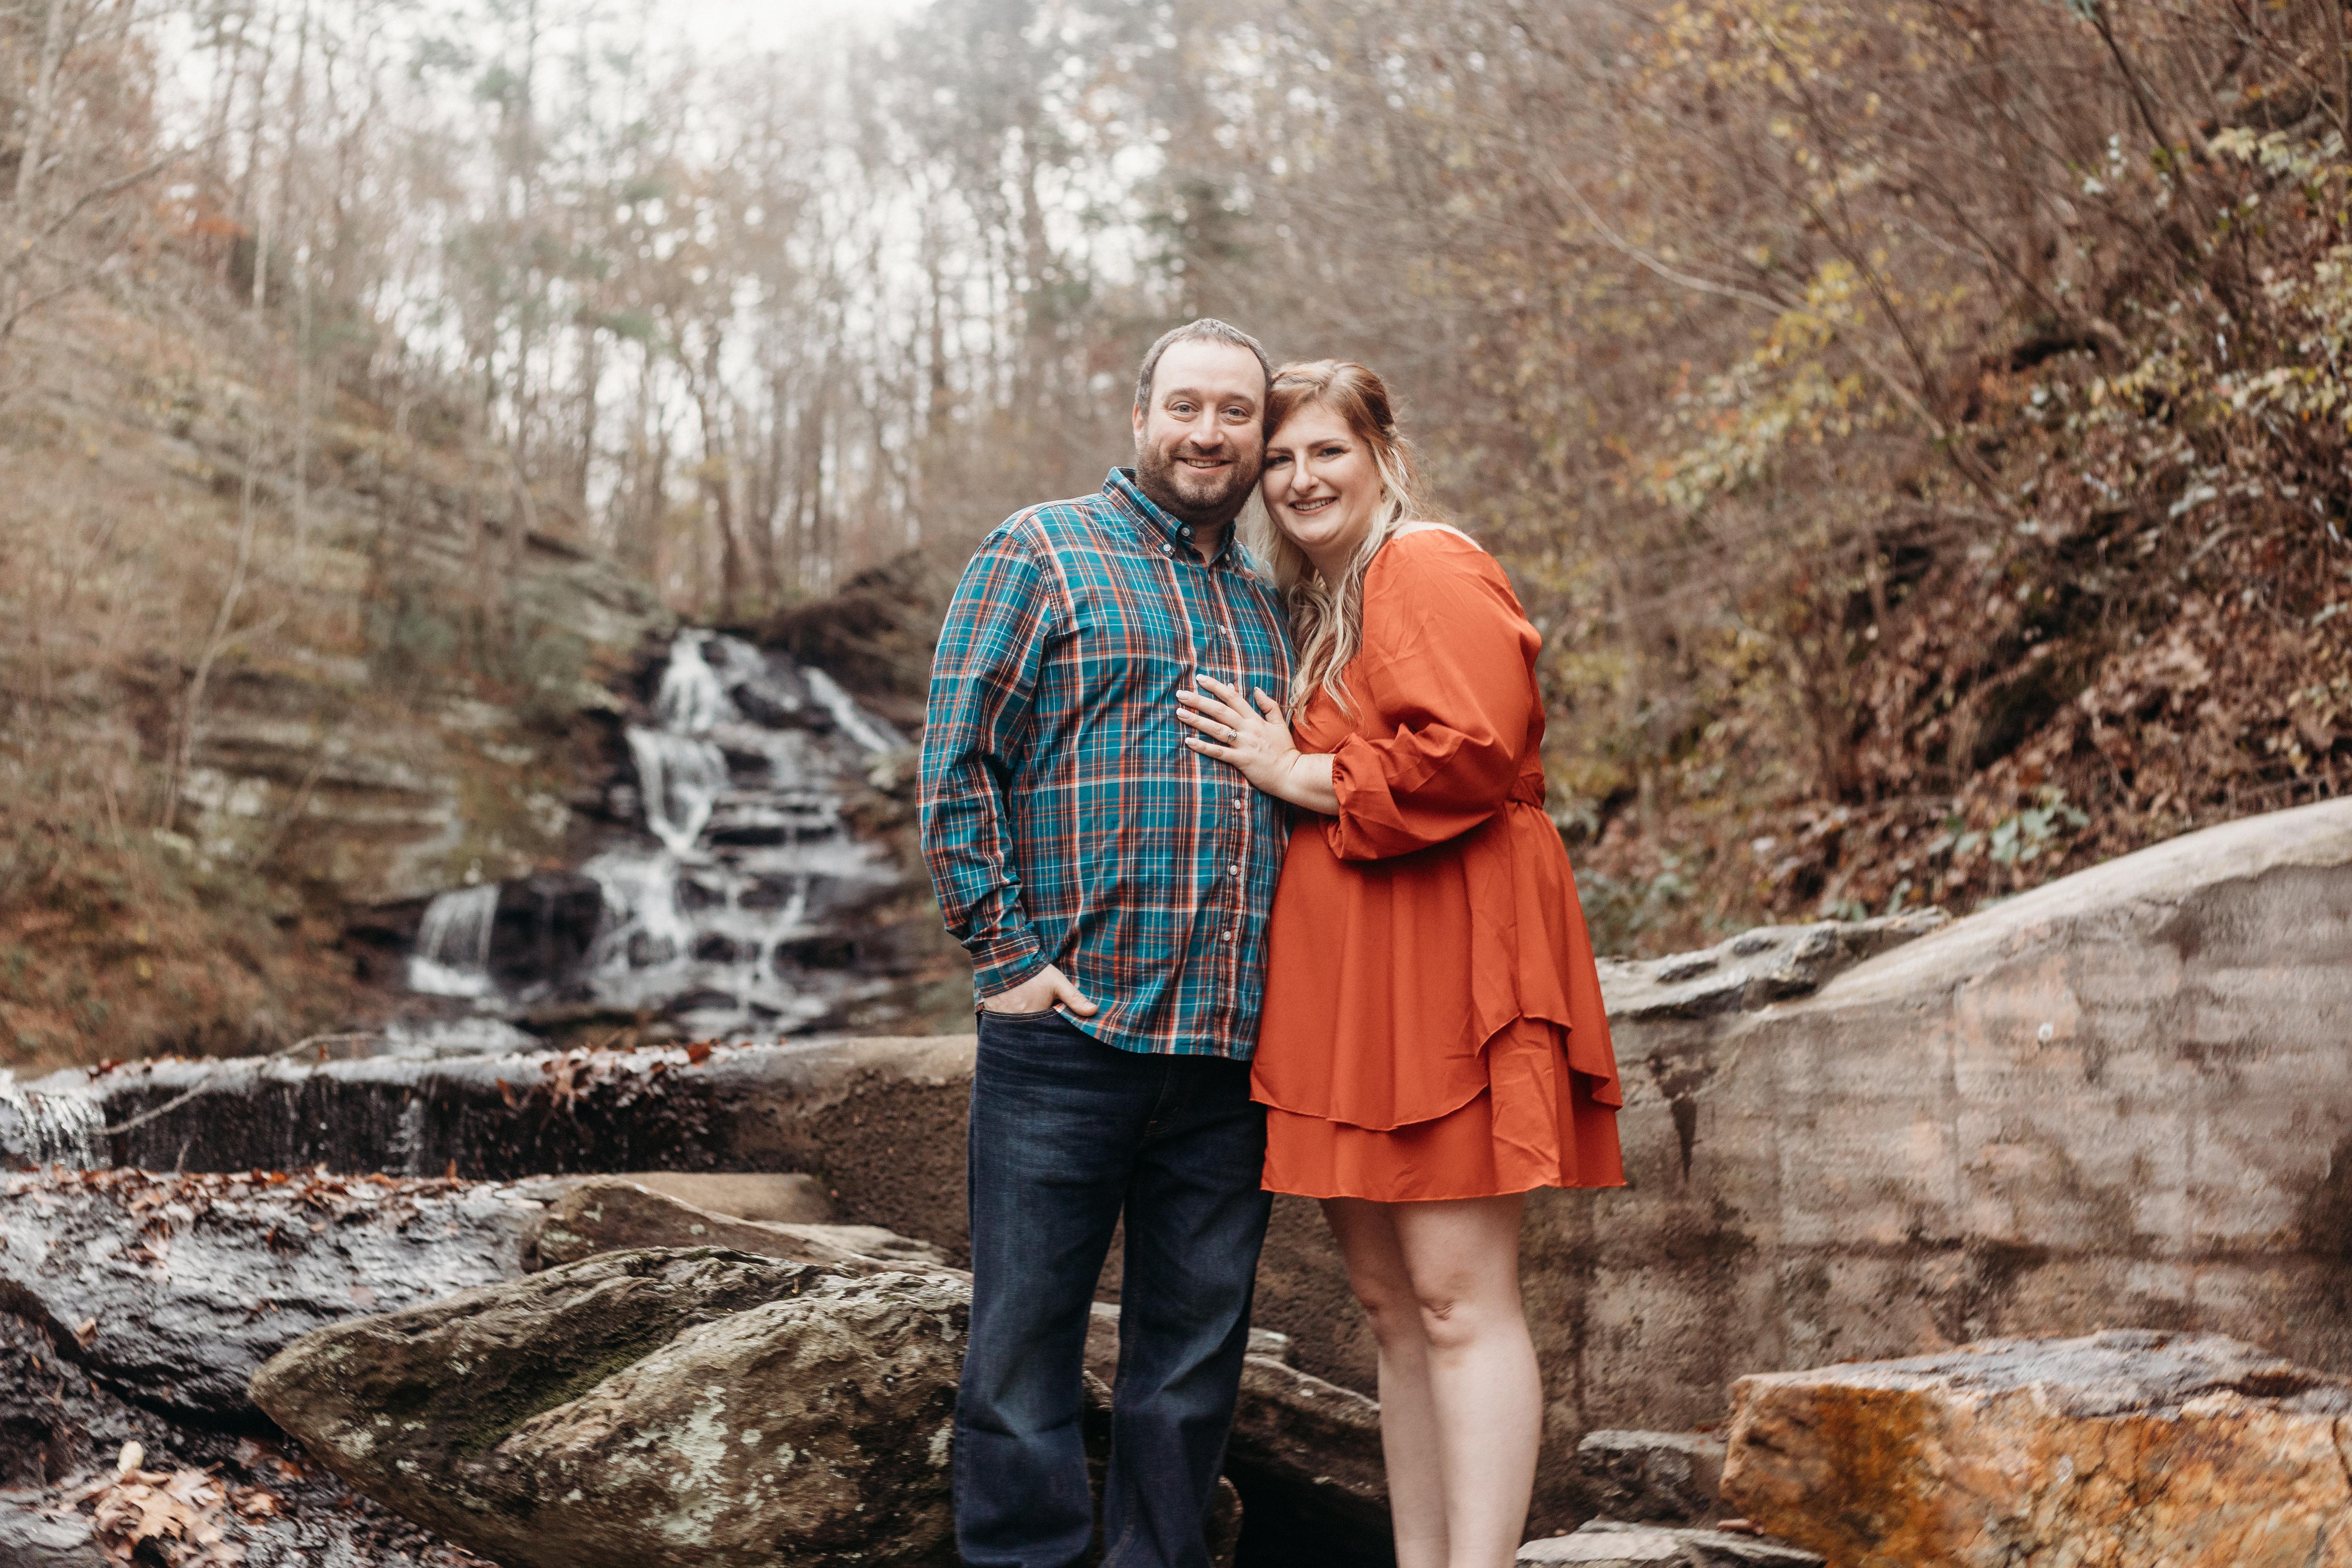 The Wedding Website of Gretchen Lawhorn and Kip McRainey